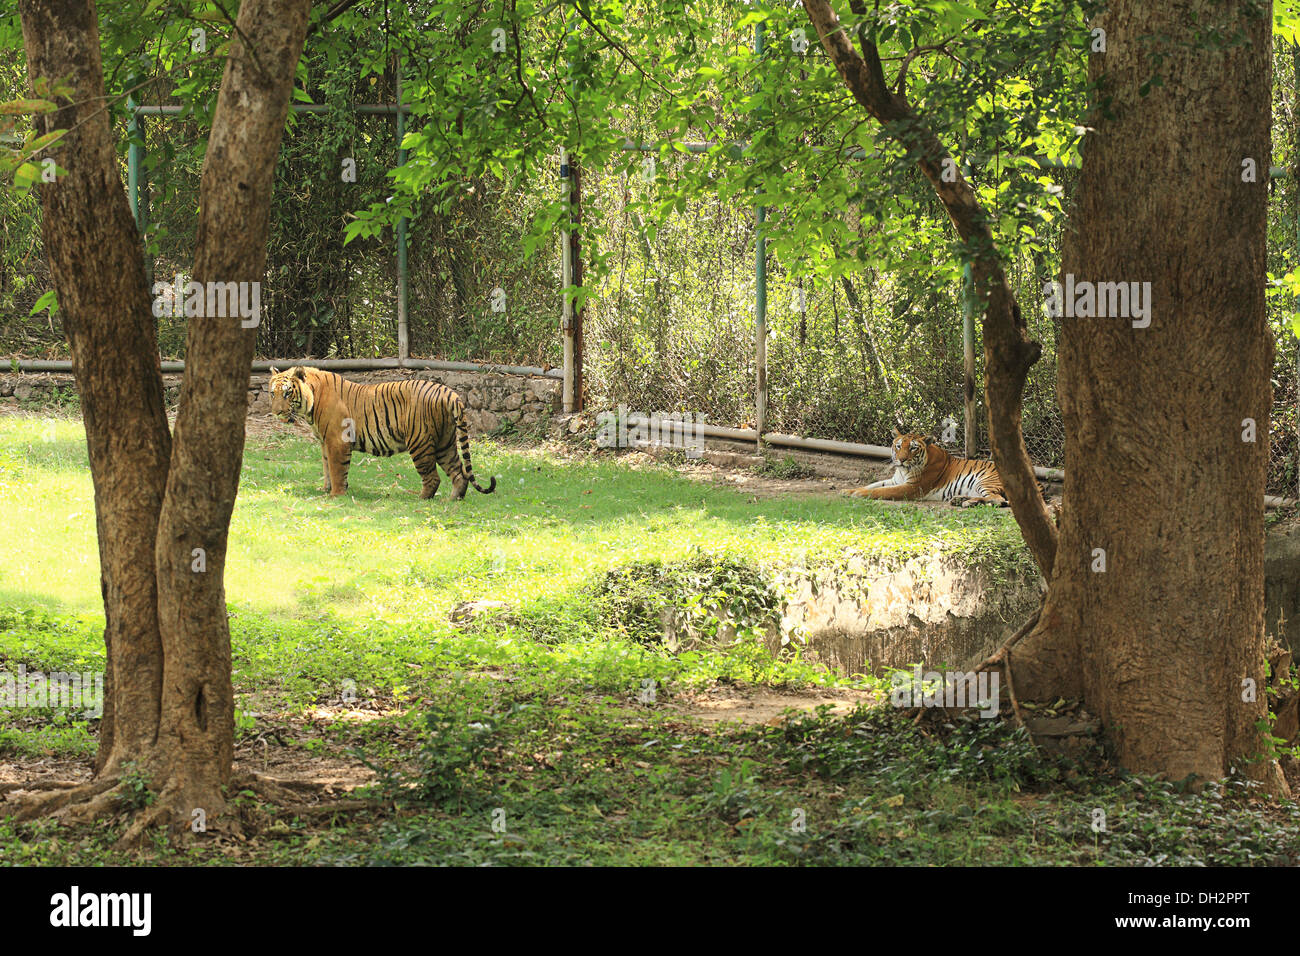 Tigers in Jamshedpur Zoo Jharkhand India Asia Stock Photo